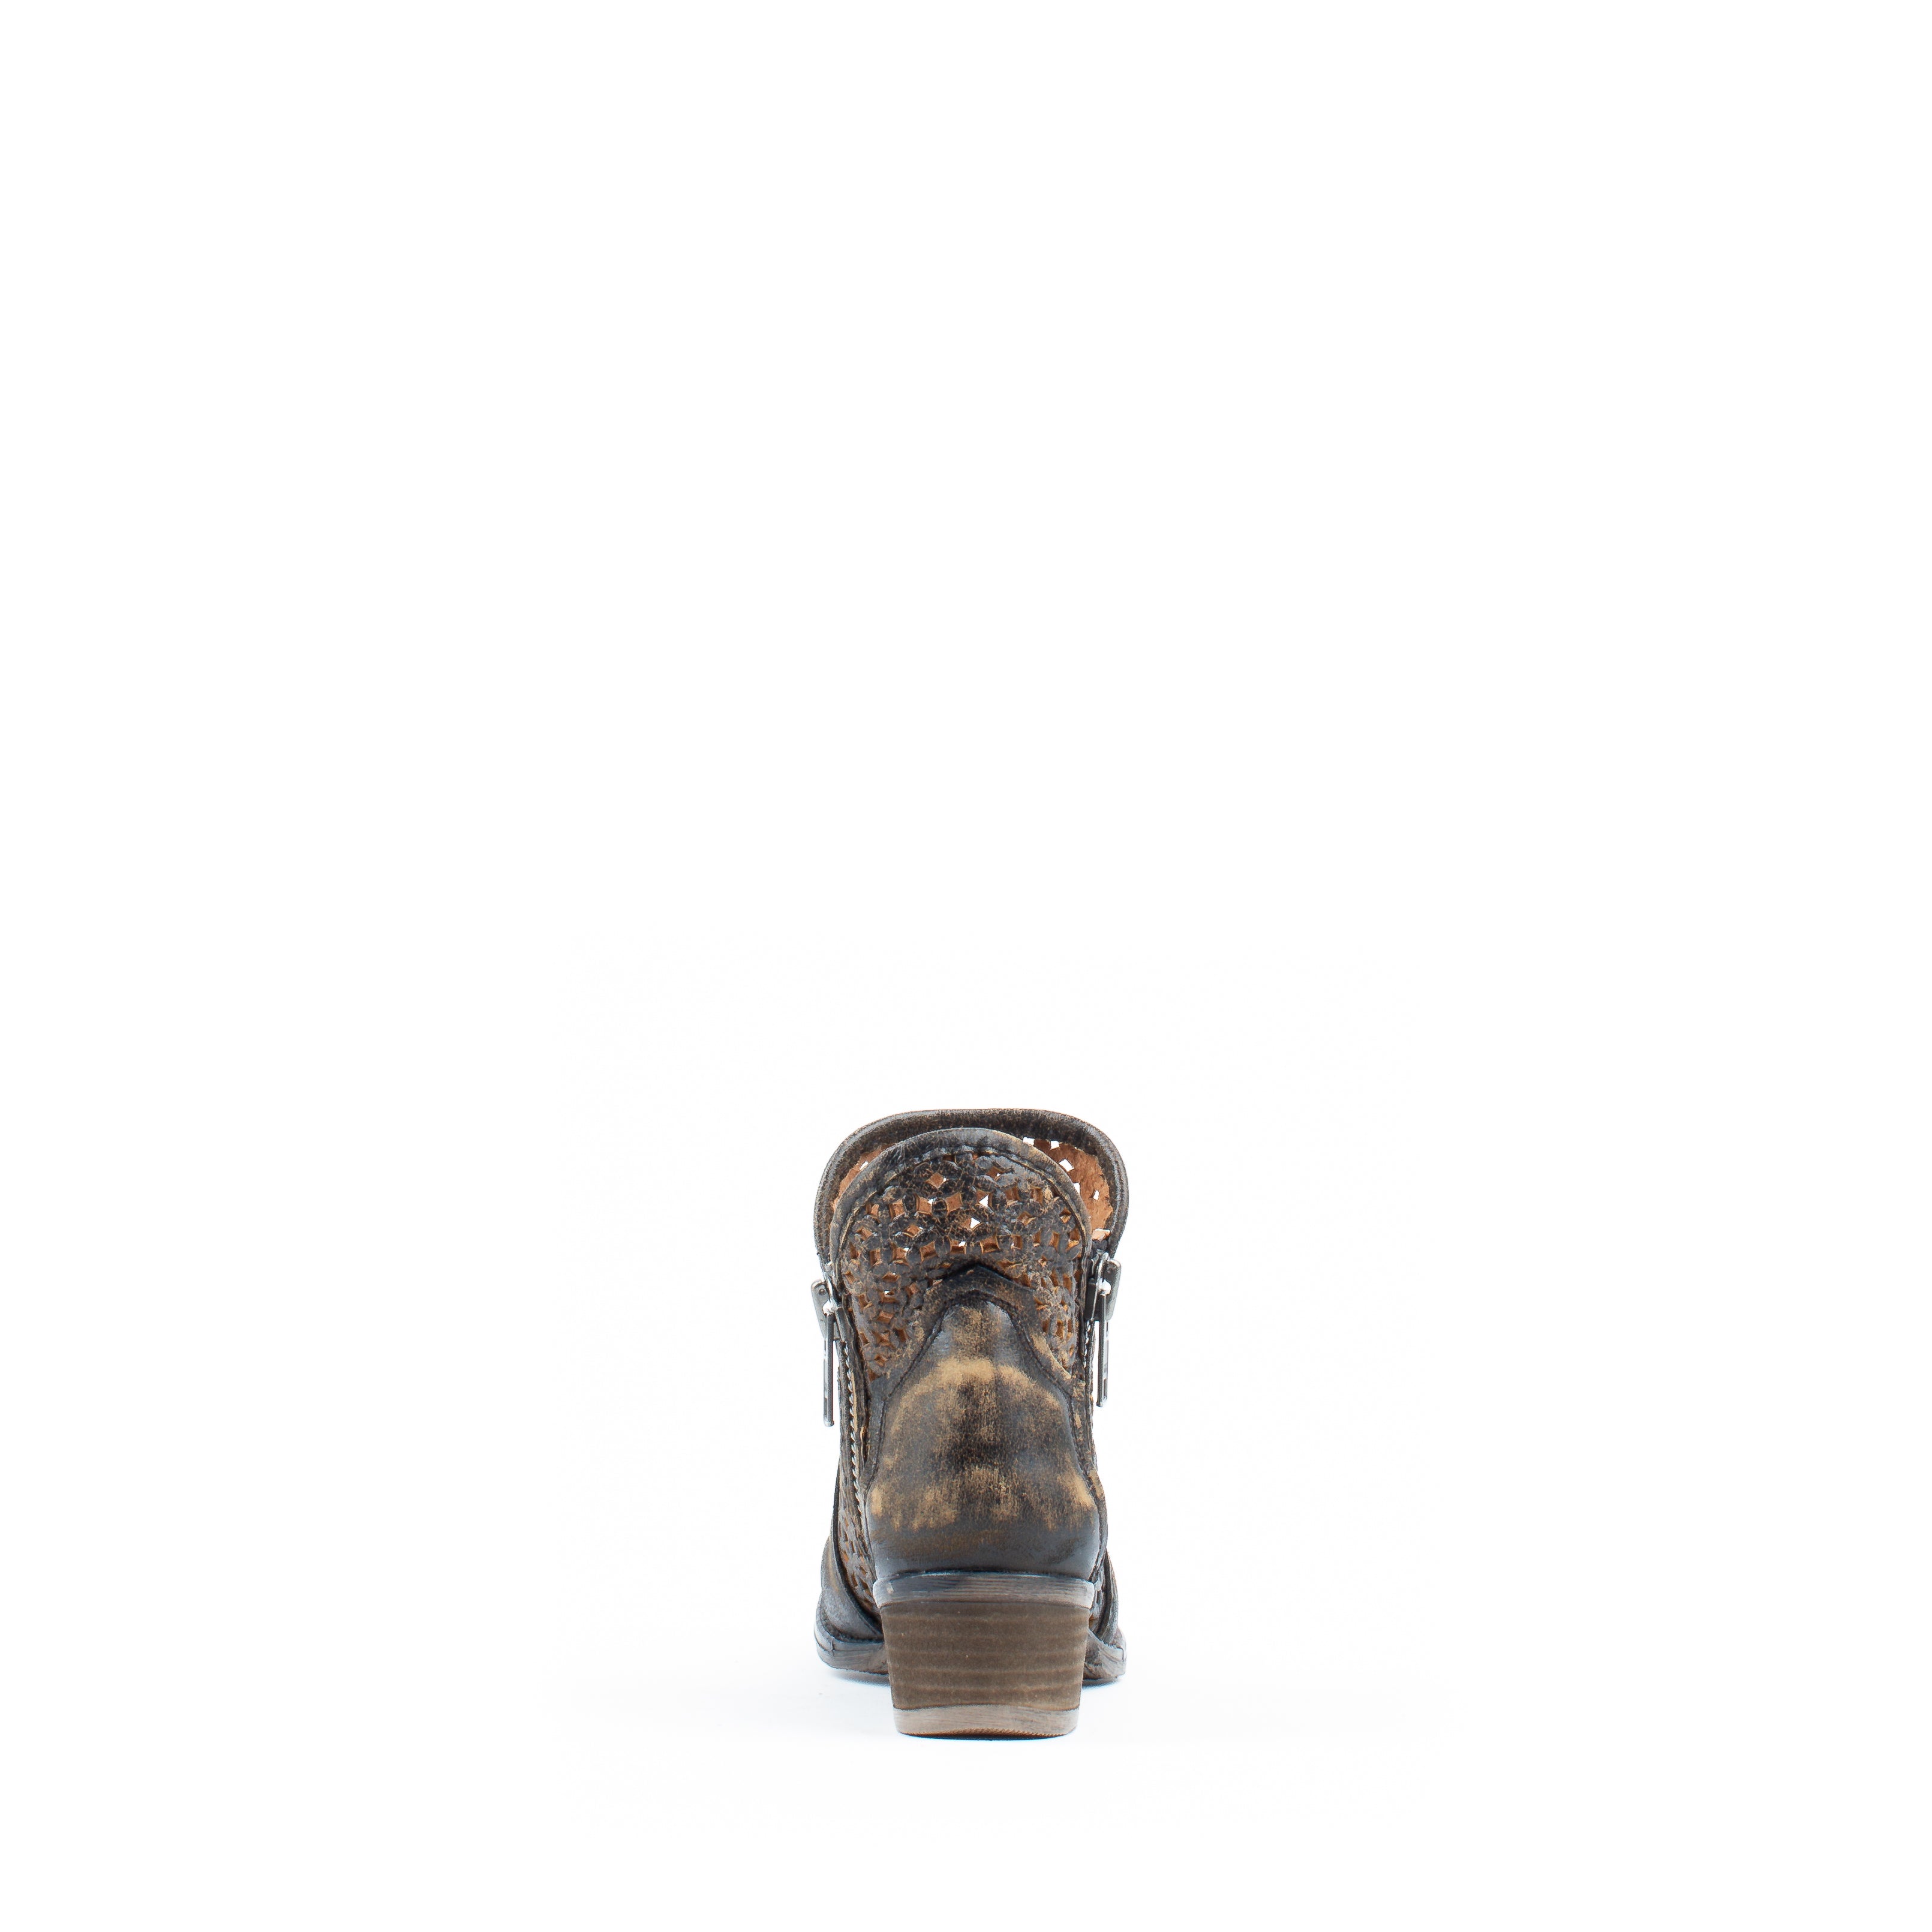 Navy Alligator Shorty Boots with XTOE